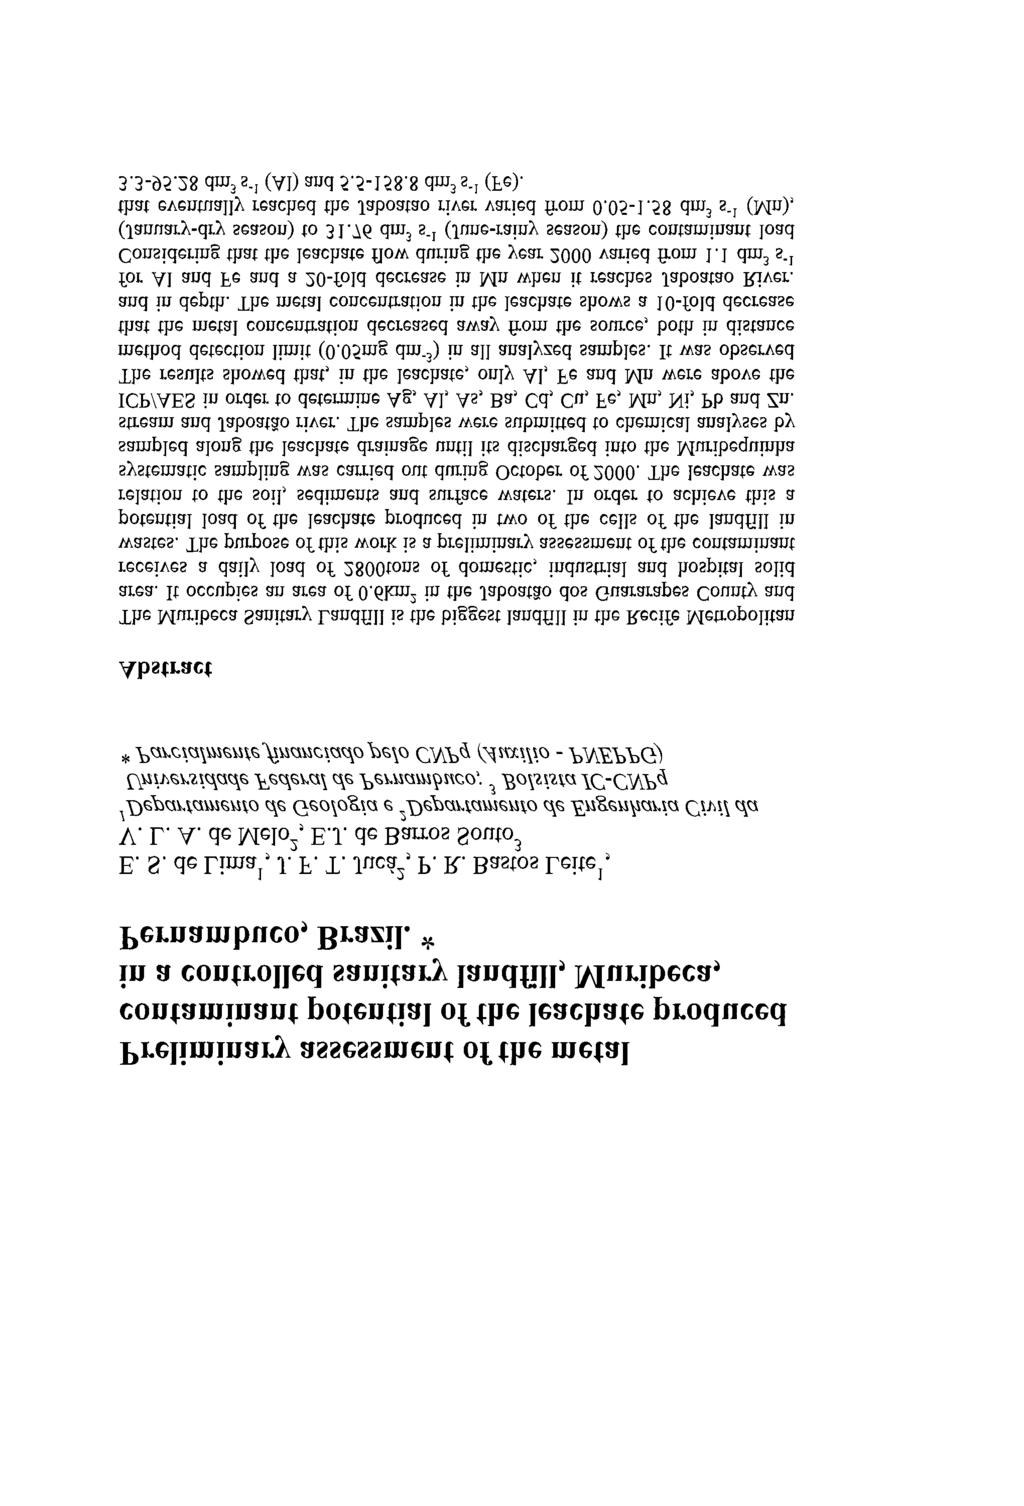 Preliminary assessment of the metal contaminant potential of the leachate produced in a controlled sanitary landfill, Muribeca, Pernambuco, Brazil. * E. S. de Limal, J. F. T. Juca2, P. R.